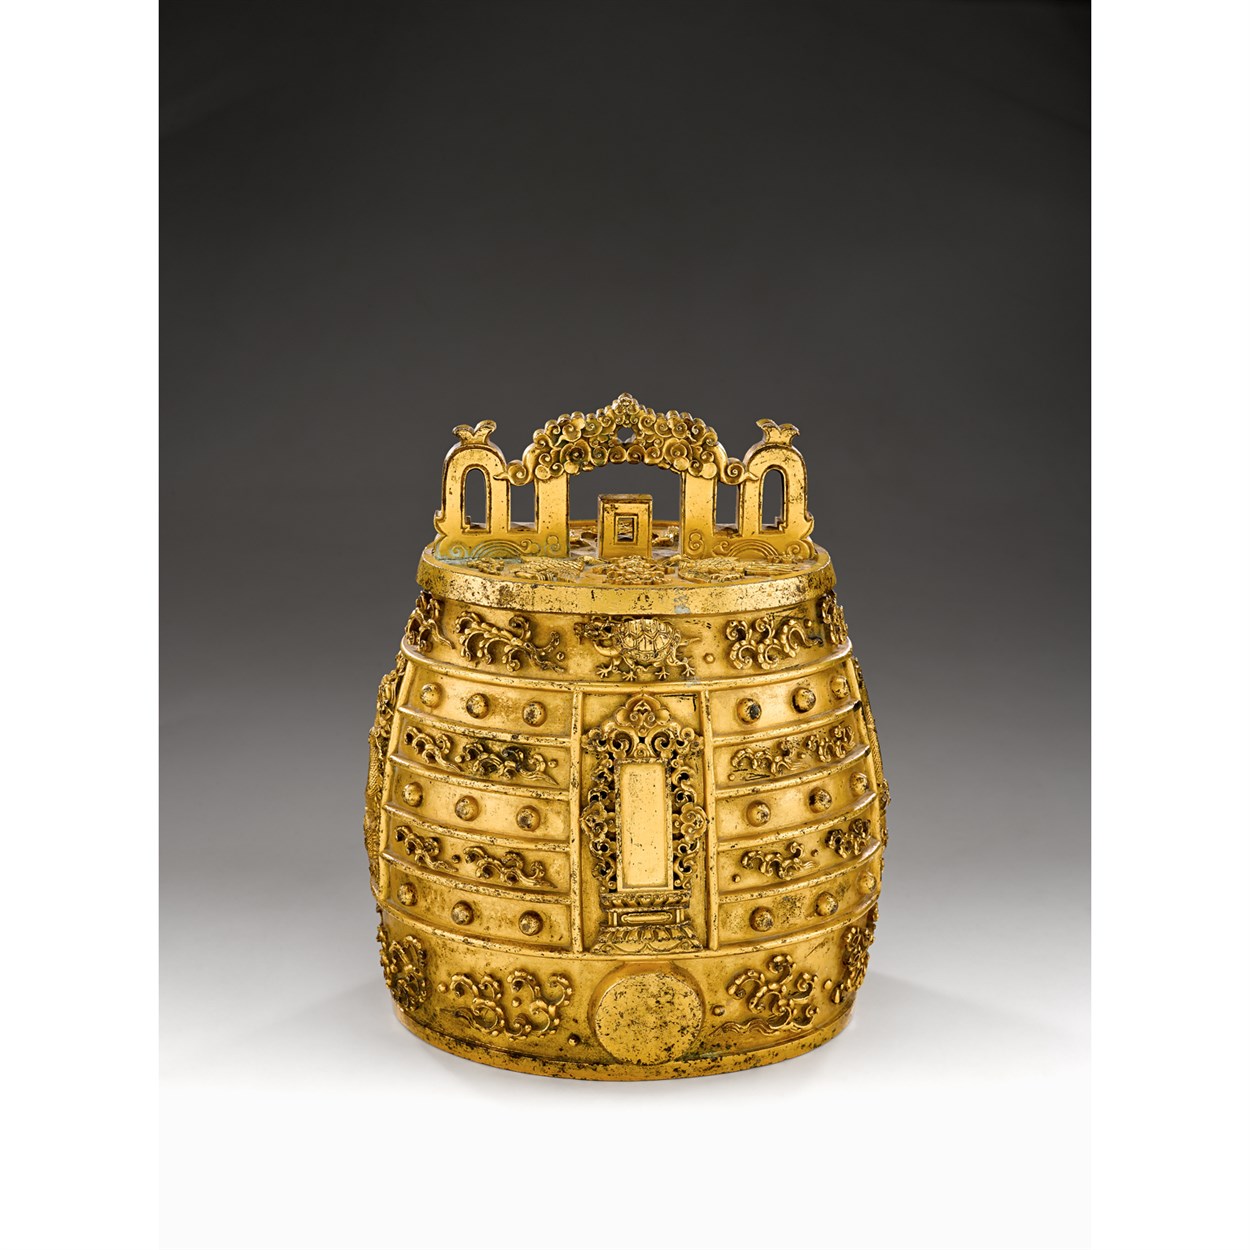 Lot 65 - A rare and important Chinese gilt bronze ritual bell, Bianzhong